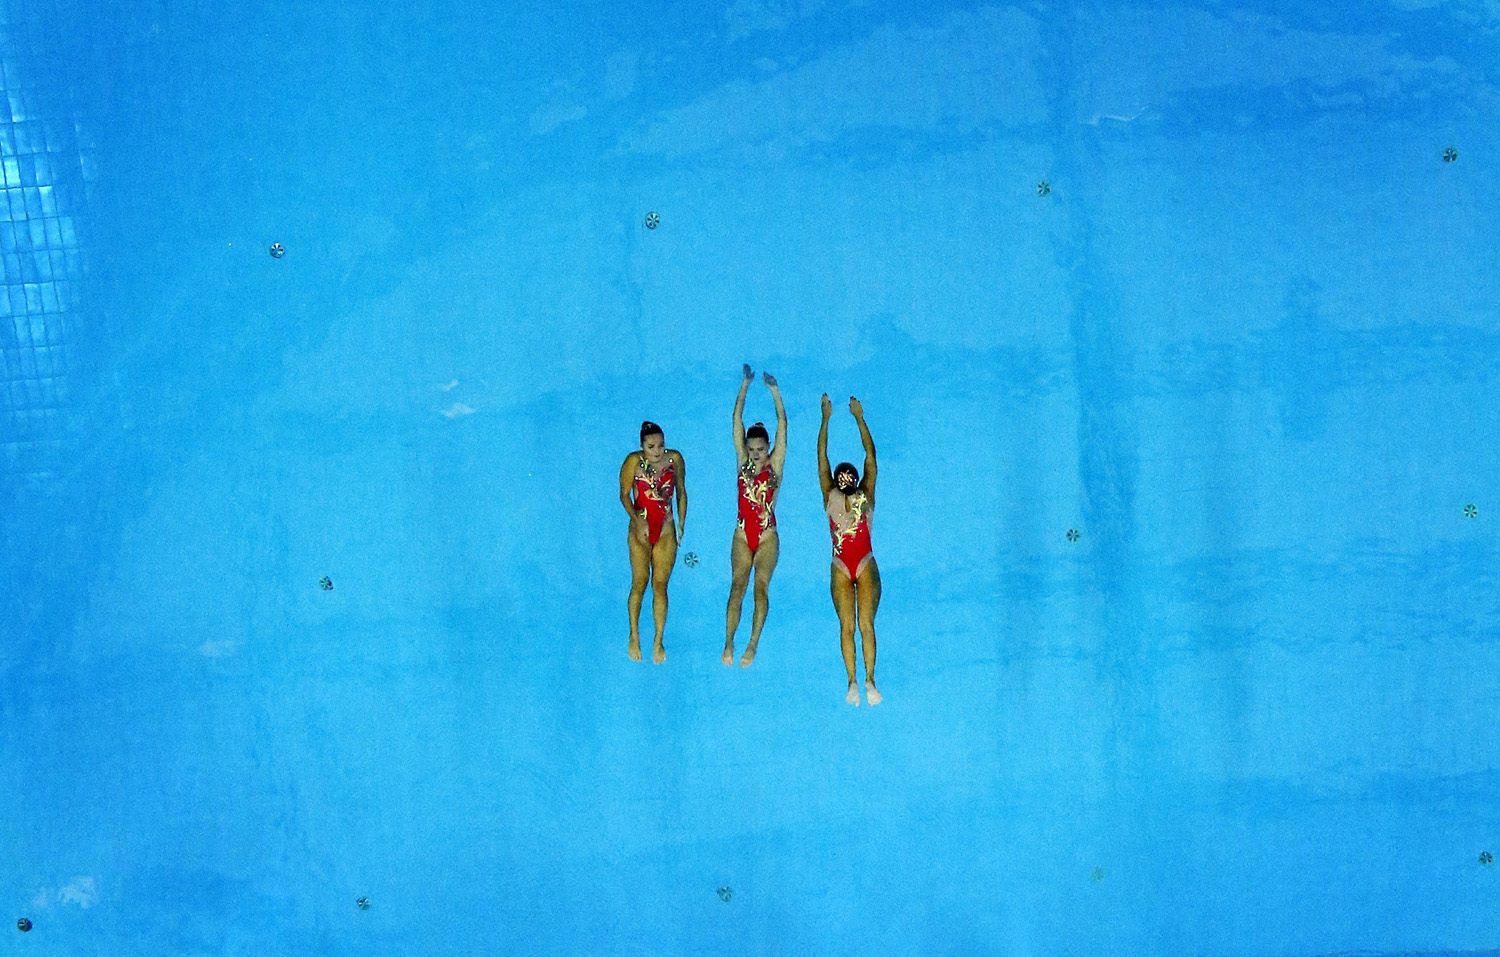 Three members of the bronze medal winning Kazakhstan team perform during their Synchronised Swimming Free Combination routine during the 17th Asian Games in Incheon